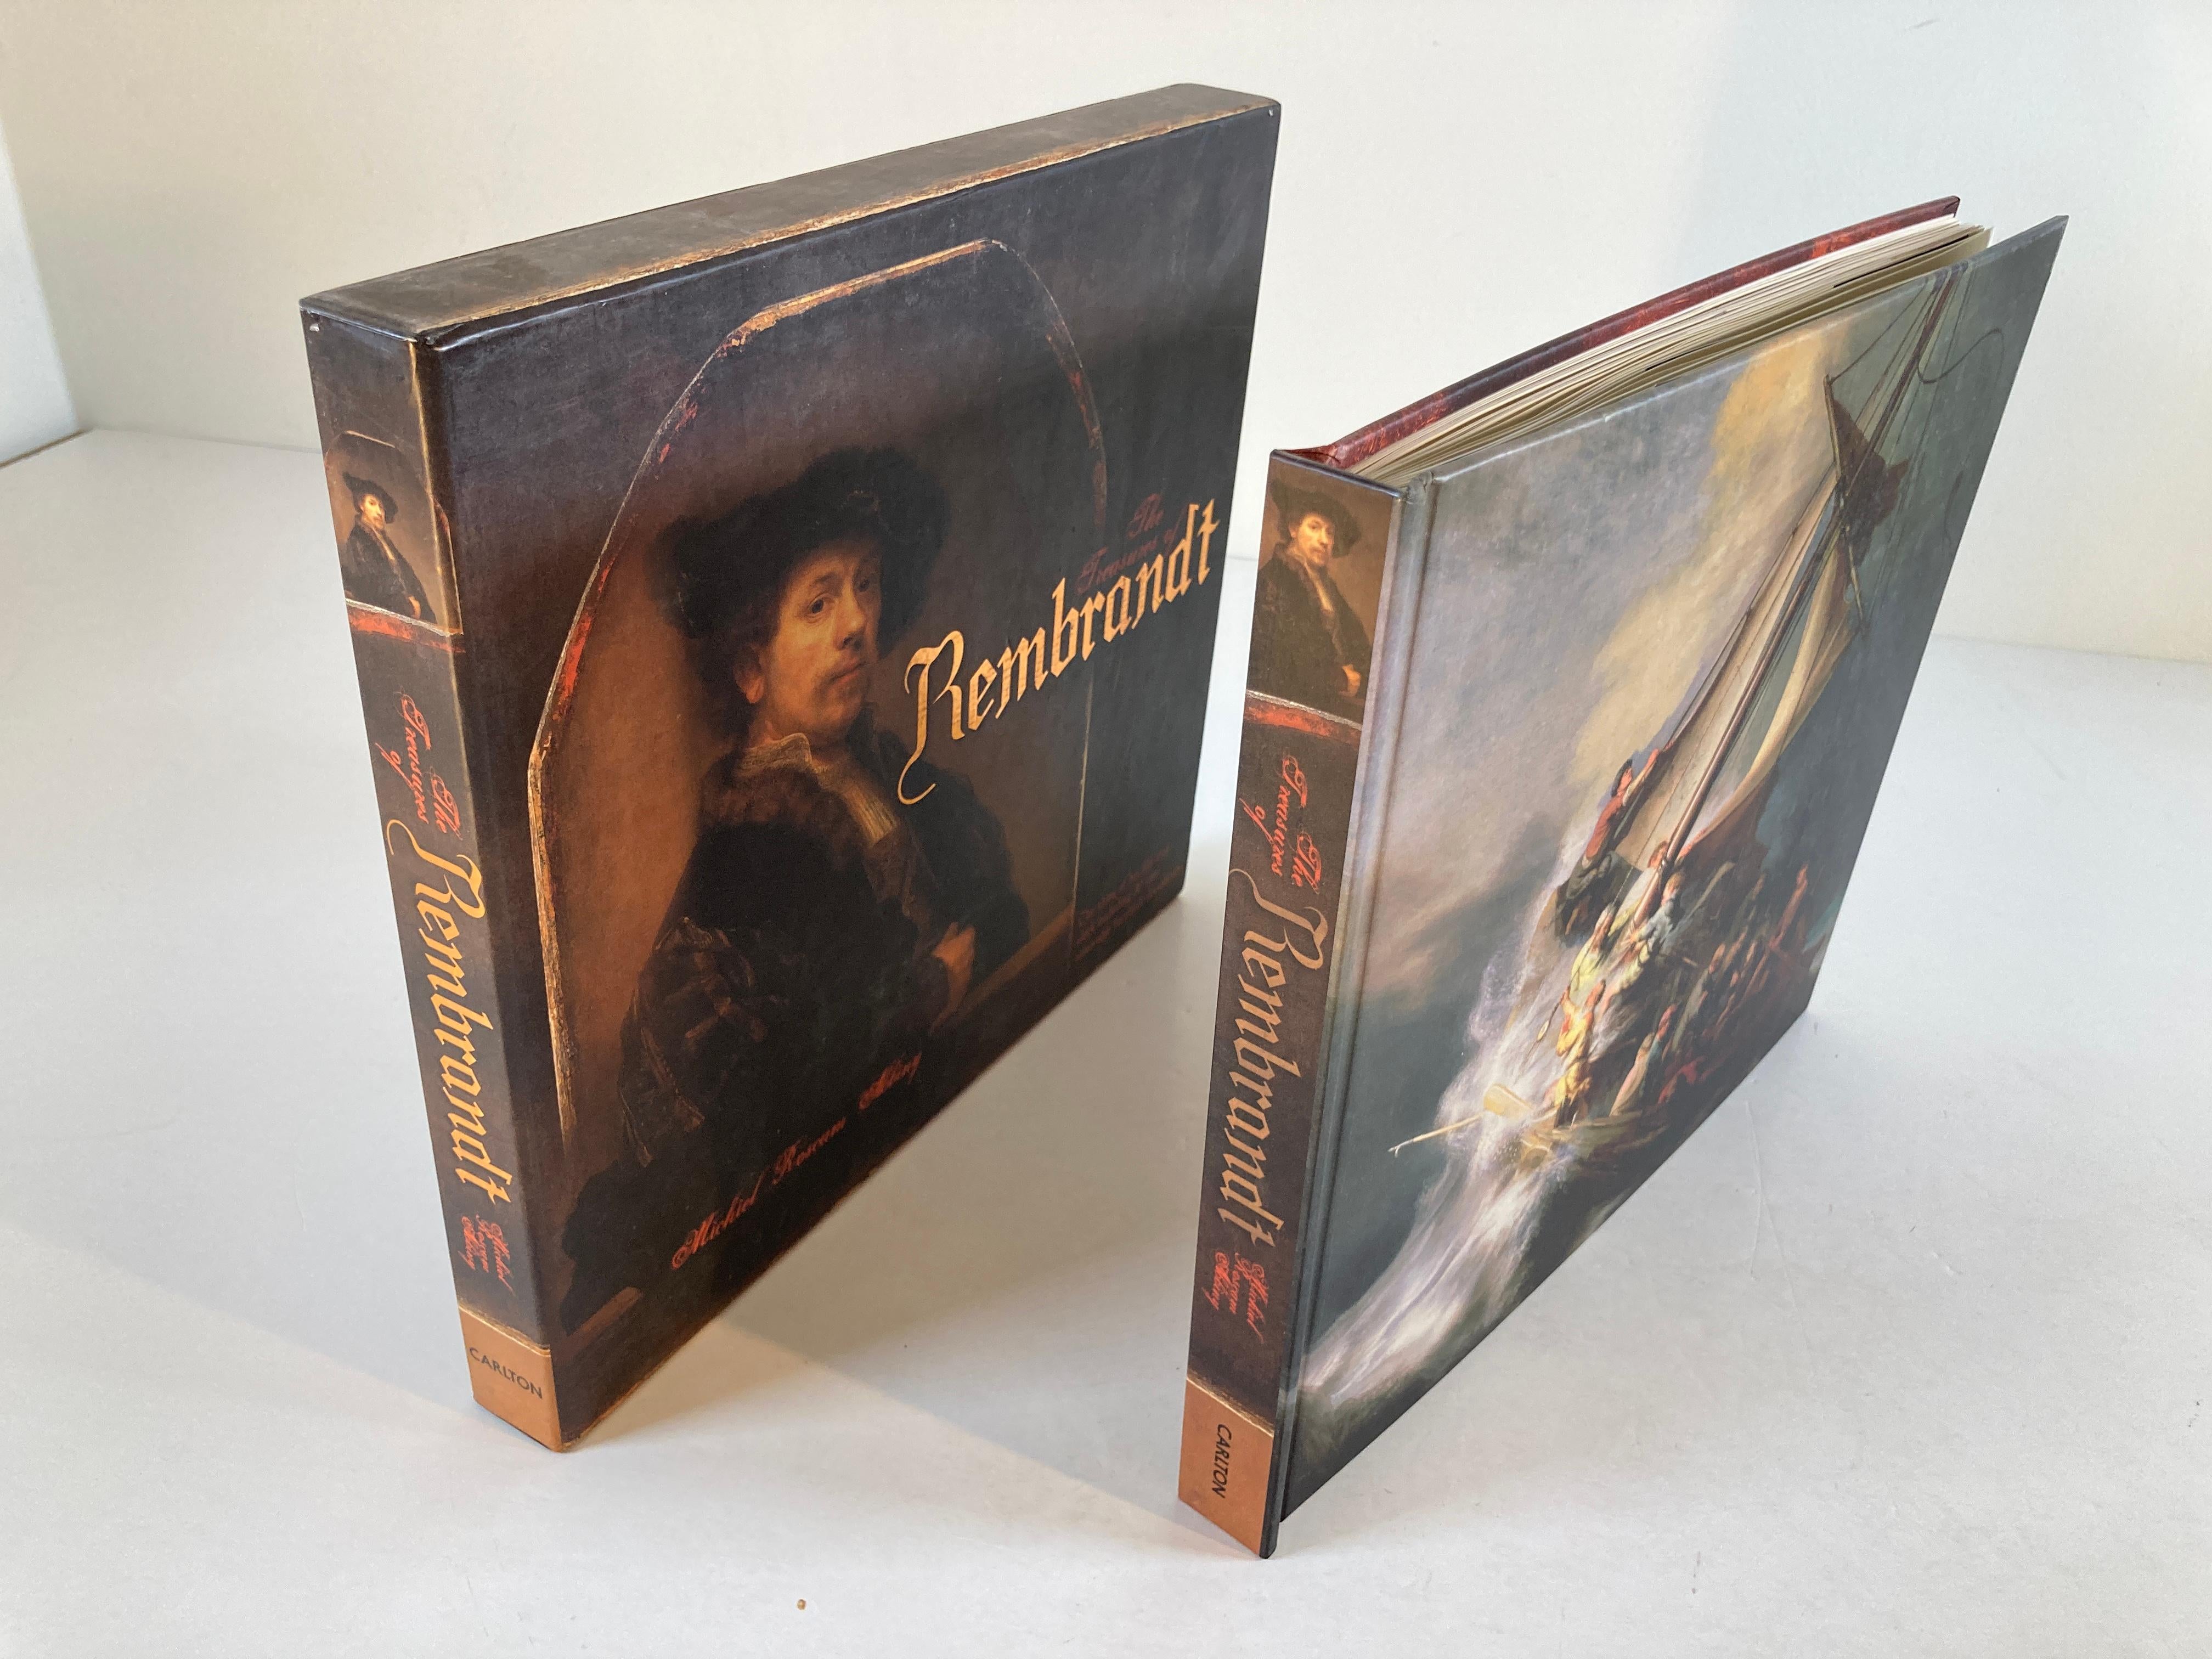 The Treasures of Rembrandt Book by Michiel Roscam Abbing Art Gallery Book In Good Condition For Sale In North Hollywood, CA